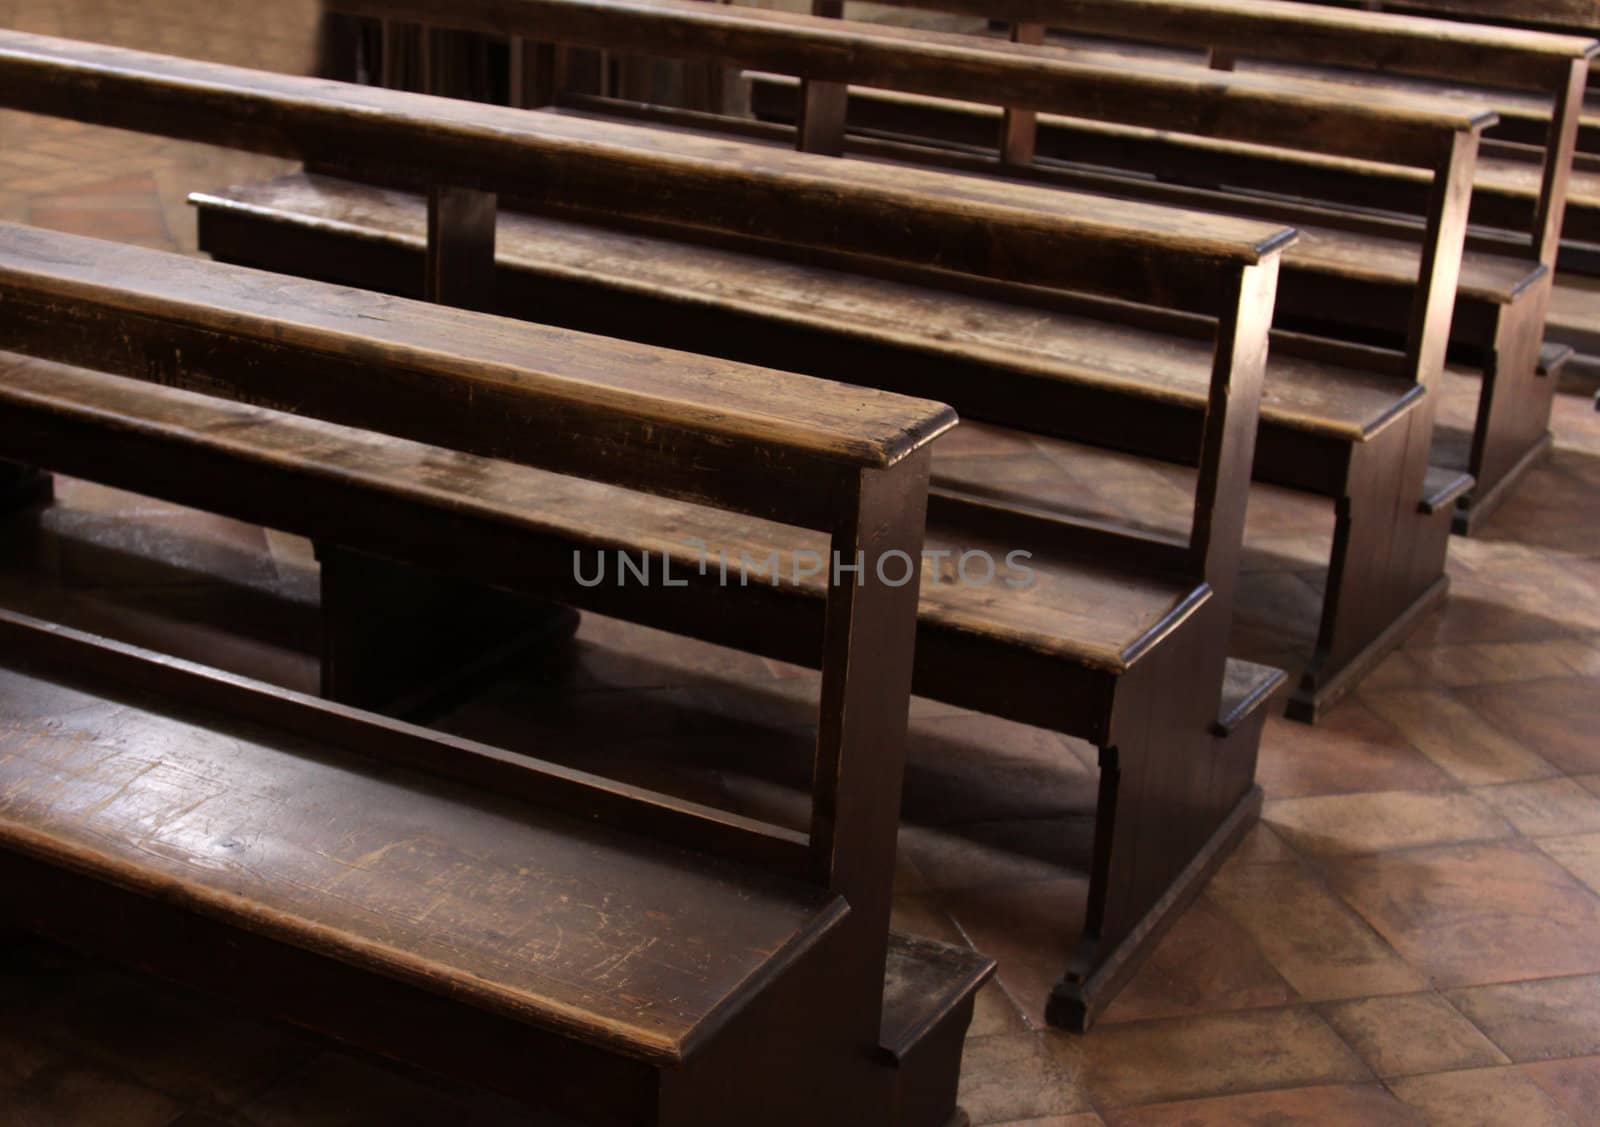 Cathedral Pews
 by ca2hill